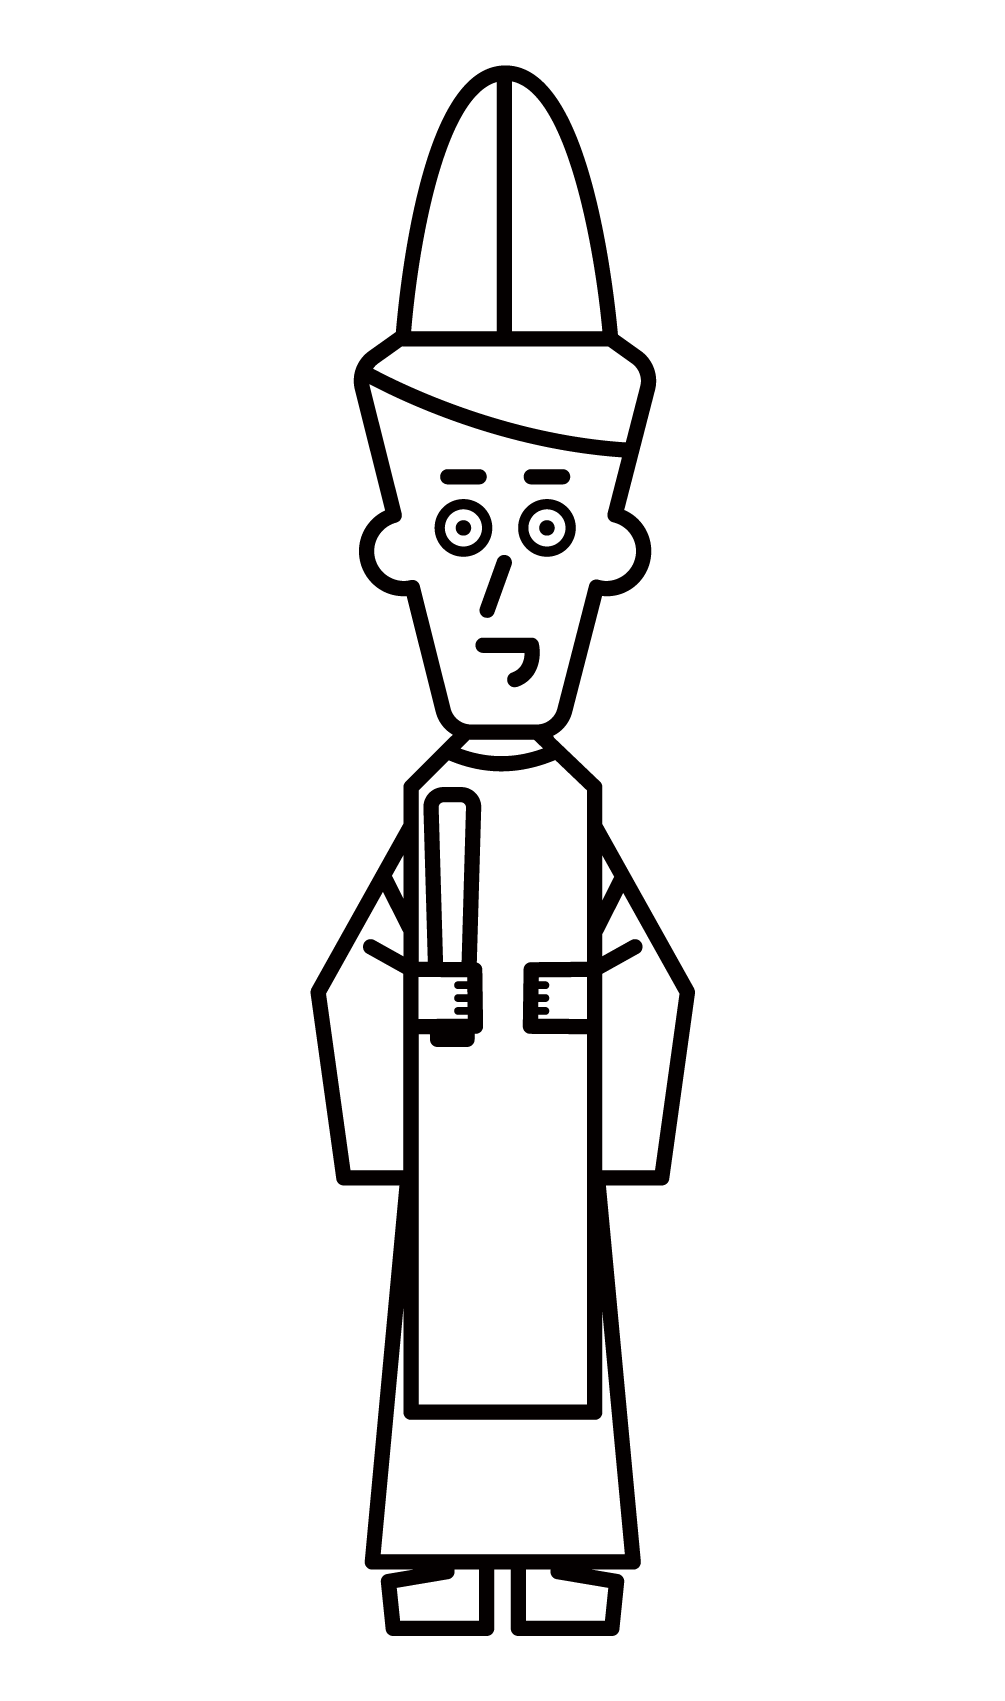 Illustration of priests and priests (male)